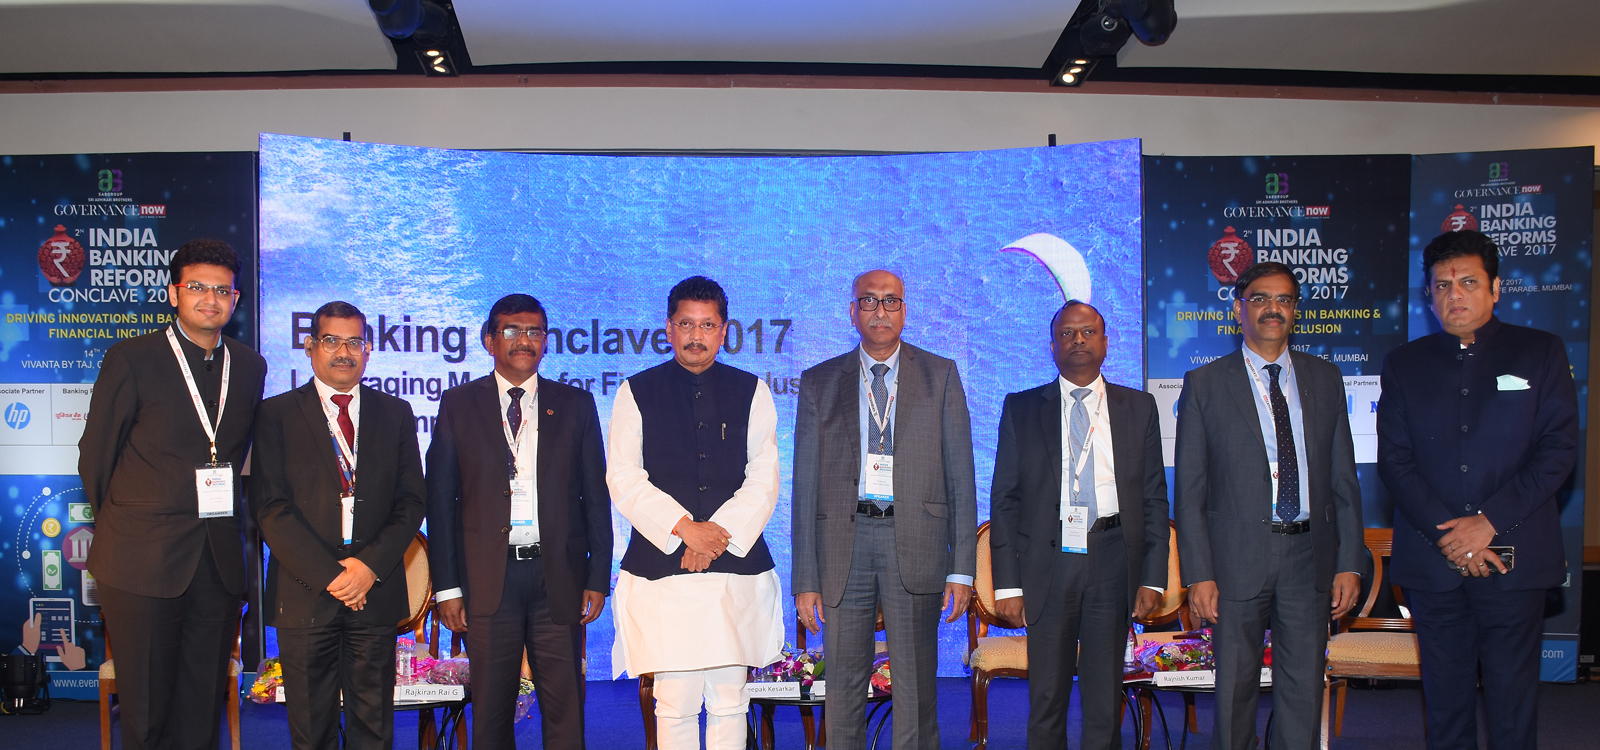 India Banking Reforms Conclave 2017